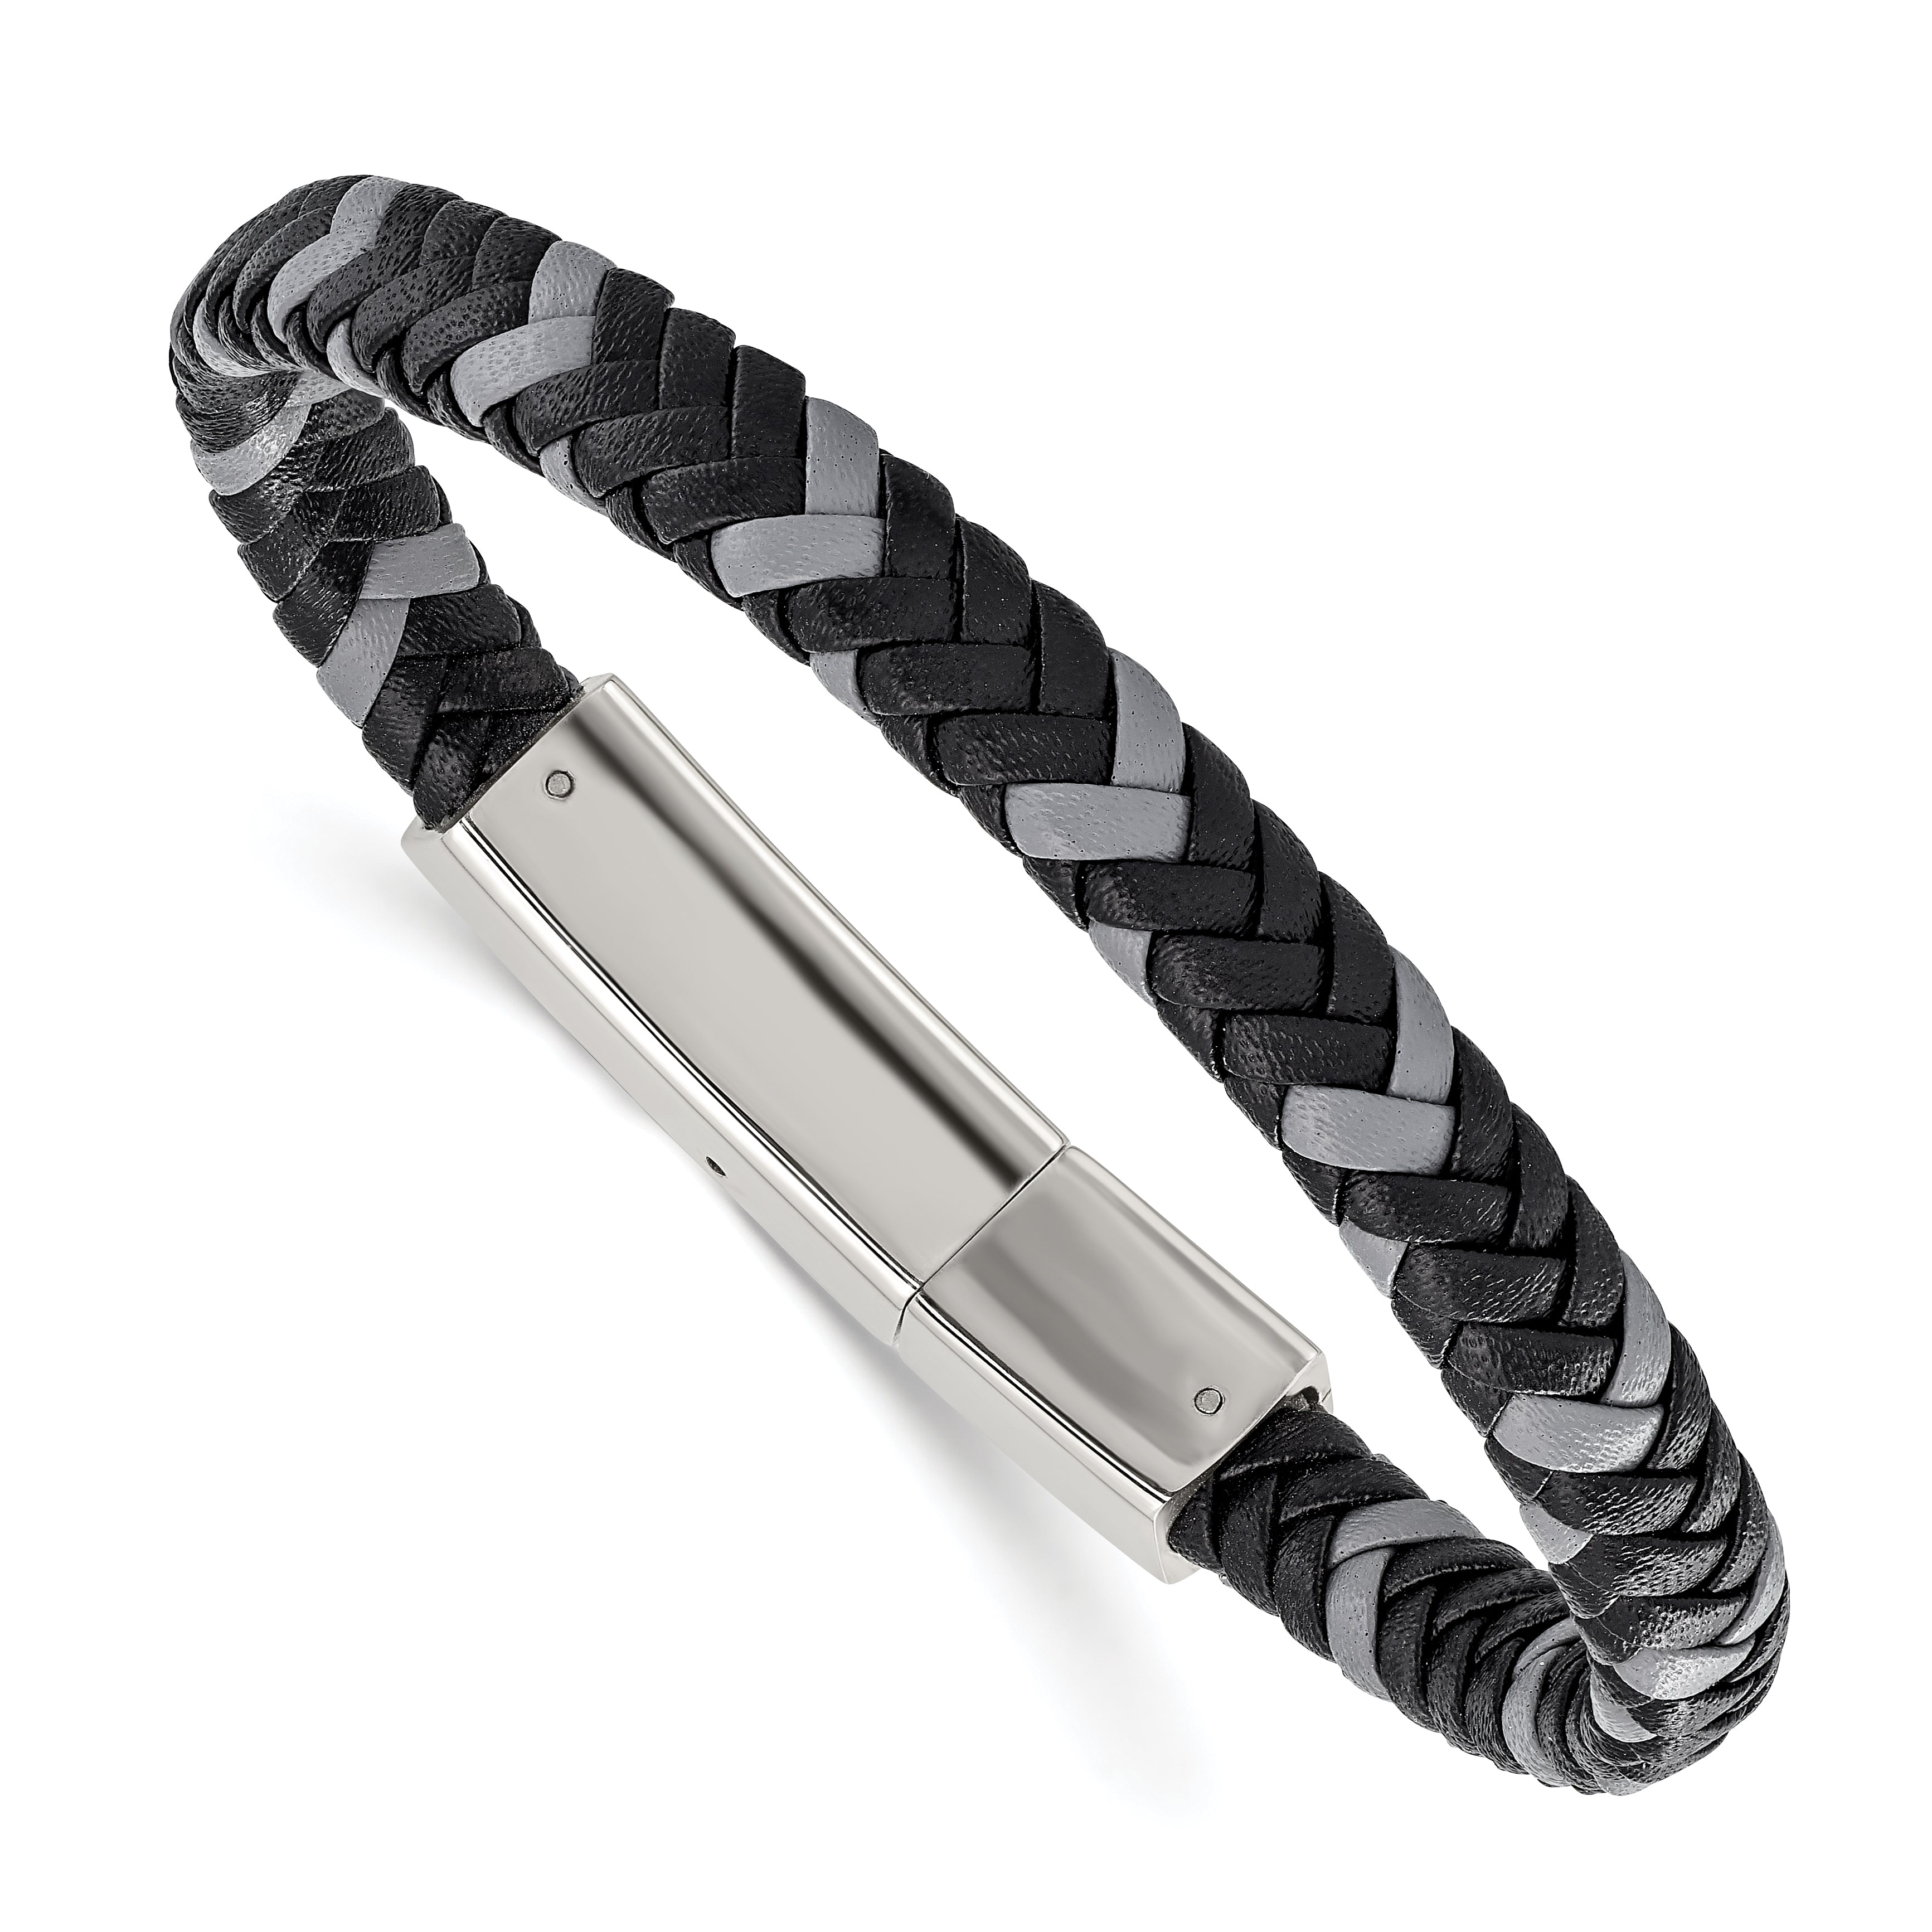 Chisel Stainless Steel Polished Black and Grey Braided Leather 8 inch Bracelet